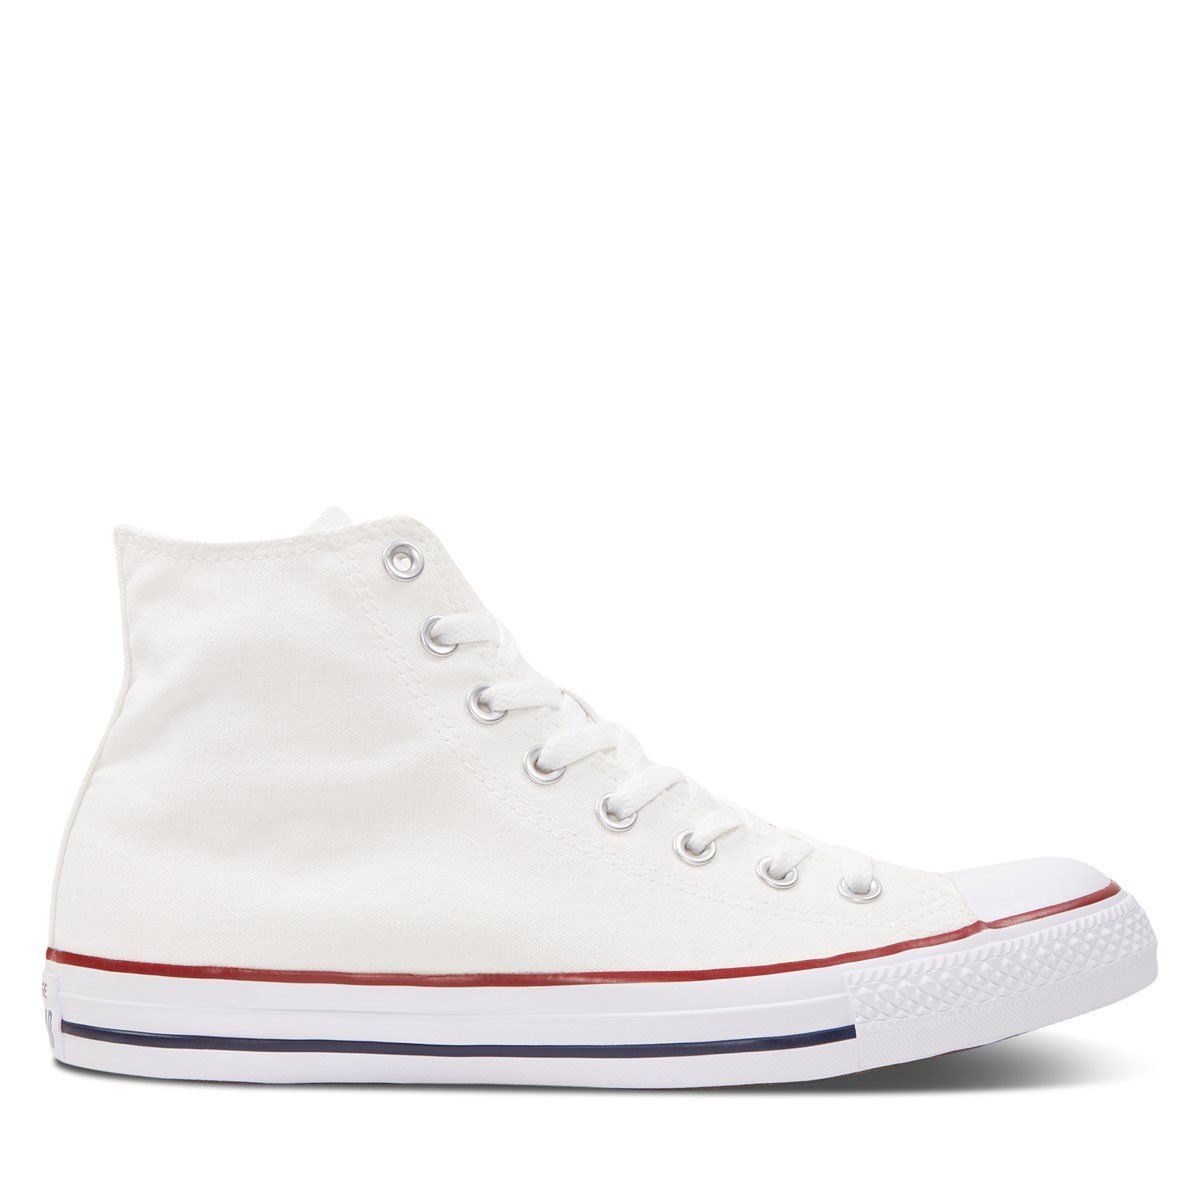 Men's Chuck Taylor All Star Classic Hi Top Sneakers in White